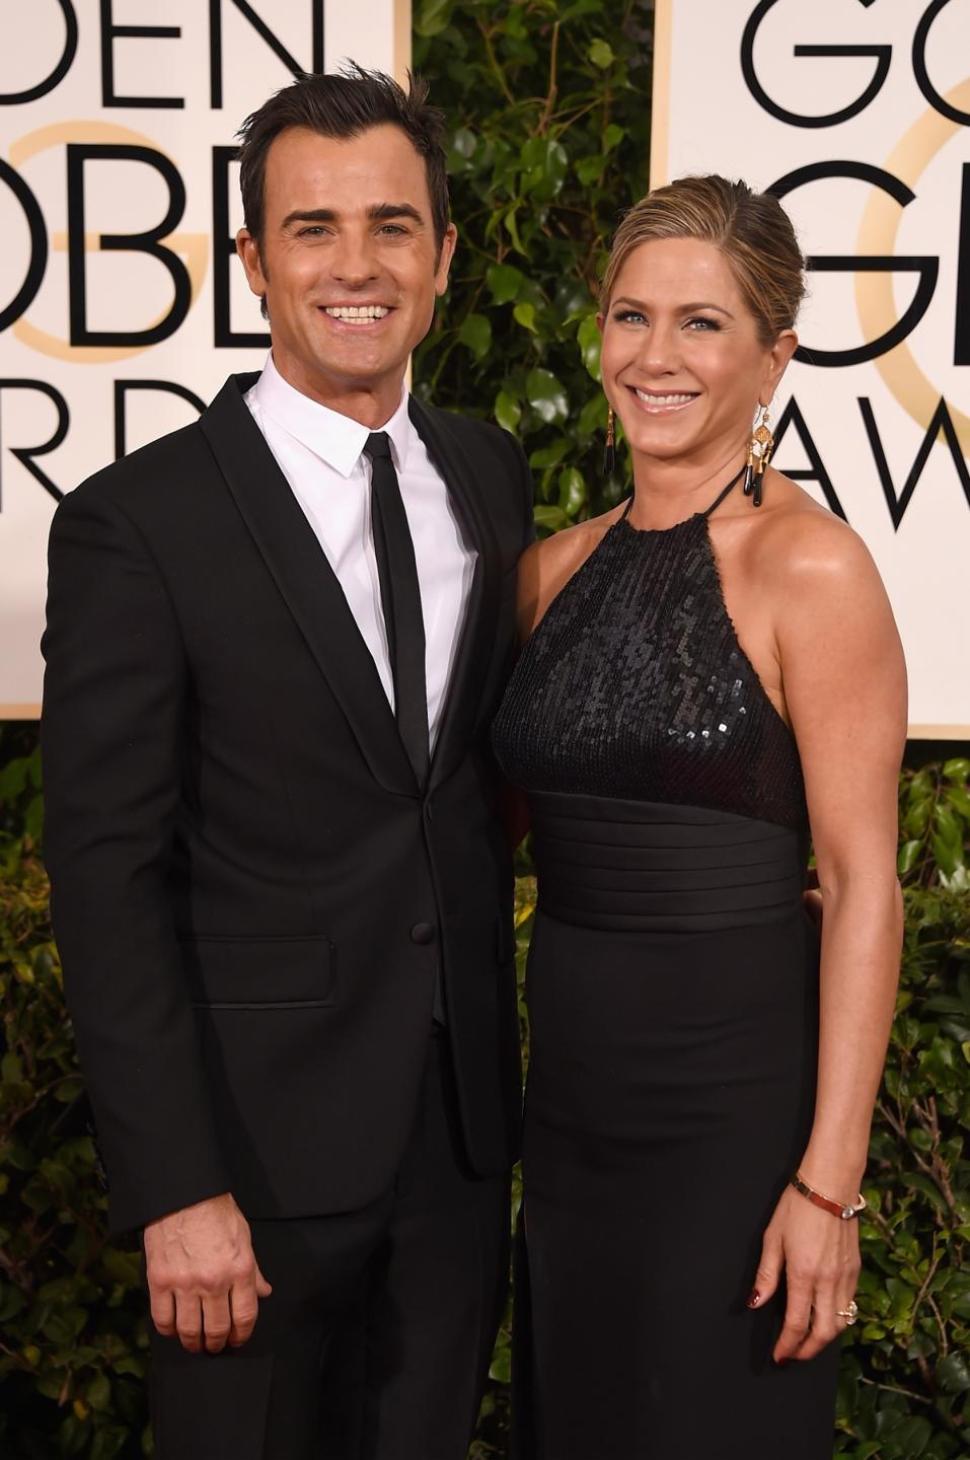 Jennifer Aniston (r.) and fiance Justin Theroux at the 2015 Golden Globes.